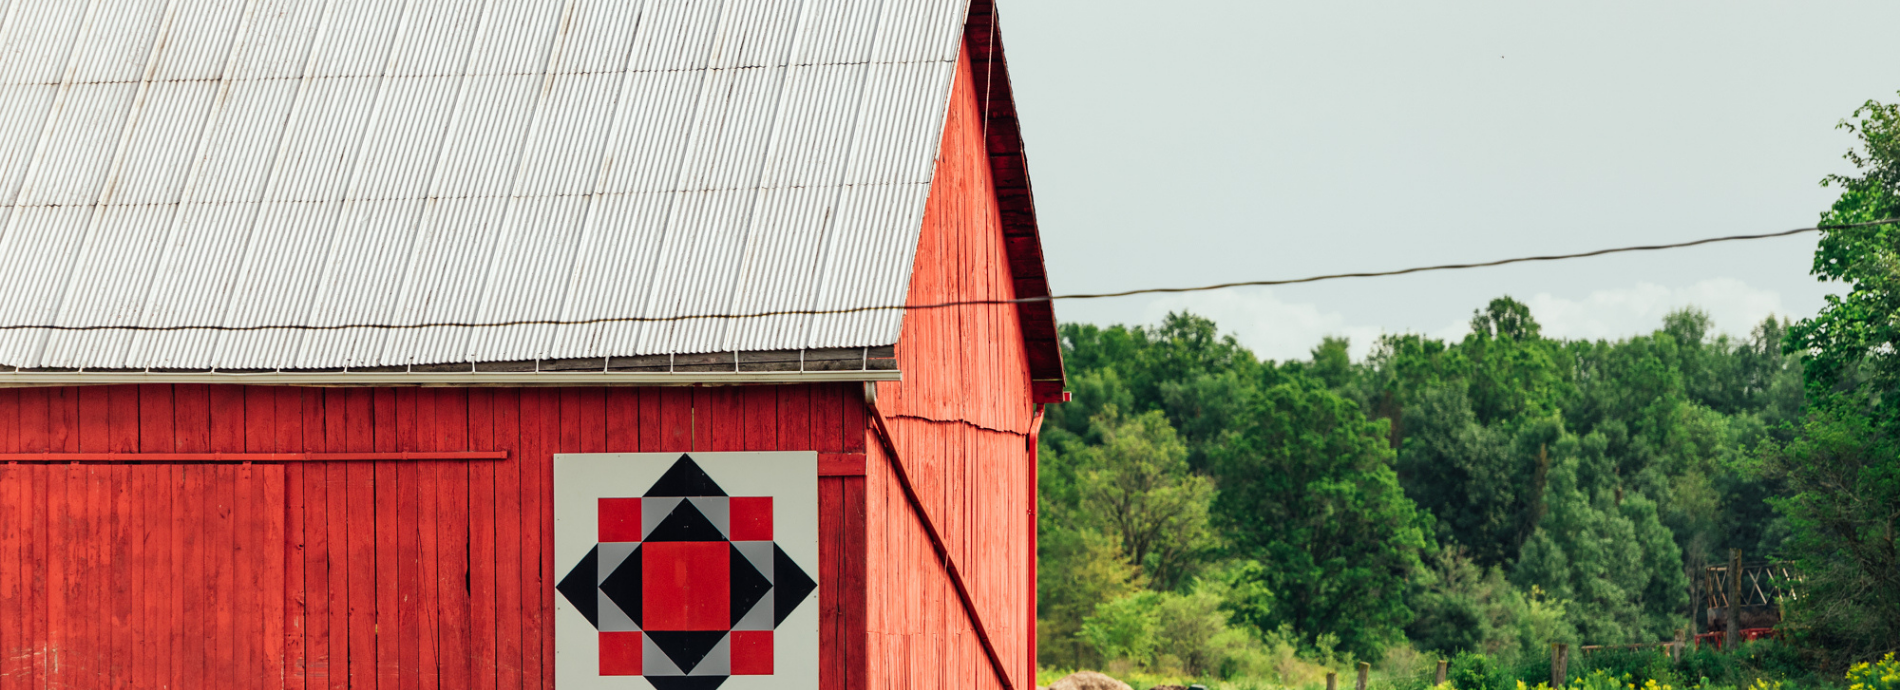 red barn with a barn quilt in rural Severn